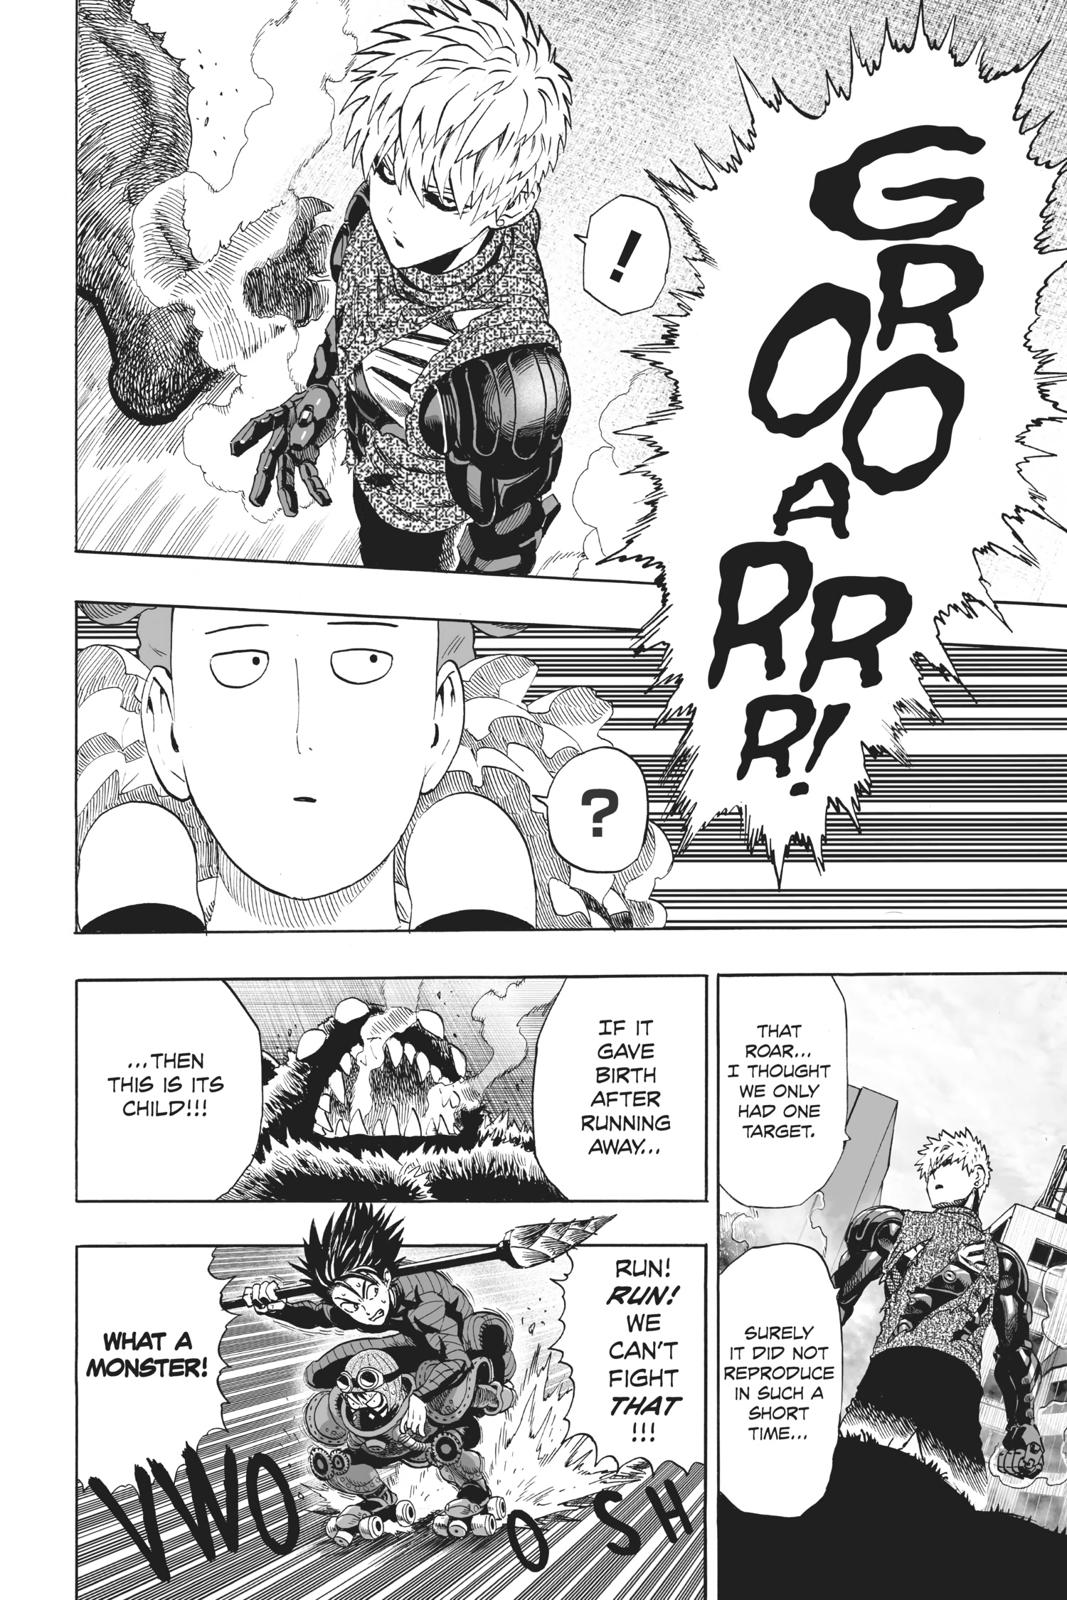 One-Punch Man, Punch 40.5 image 24